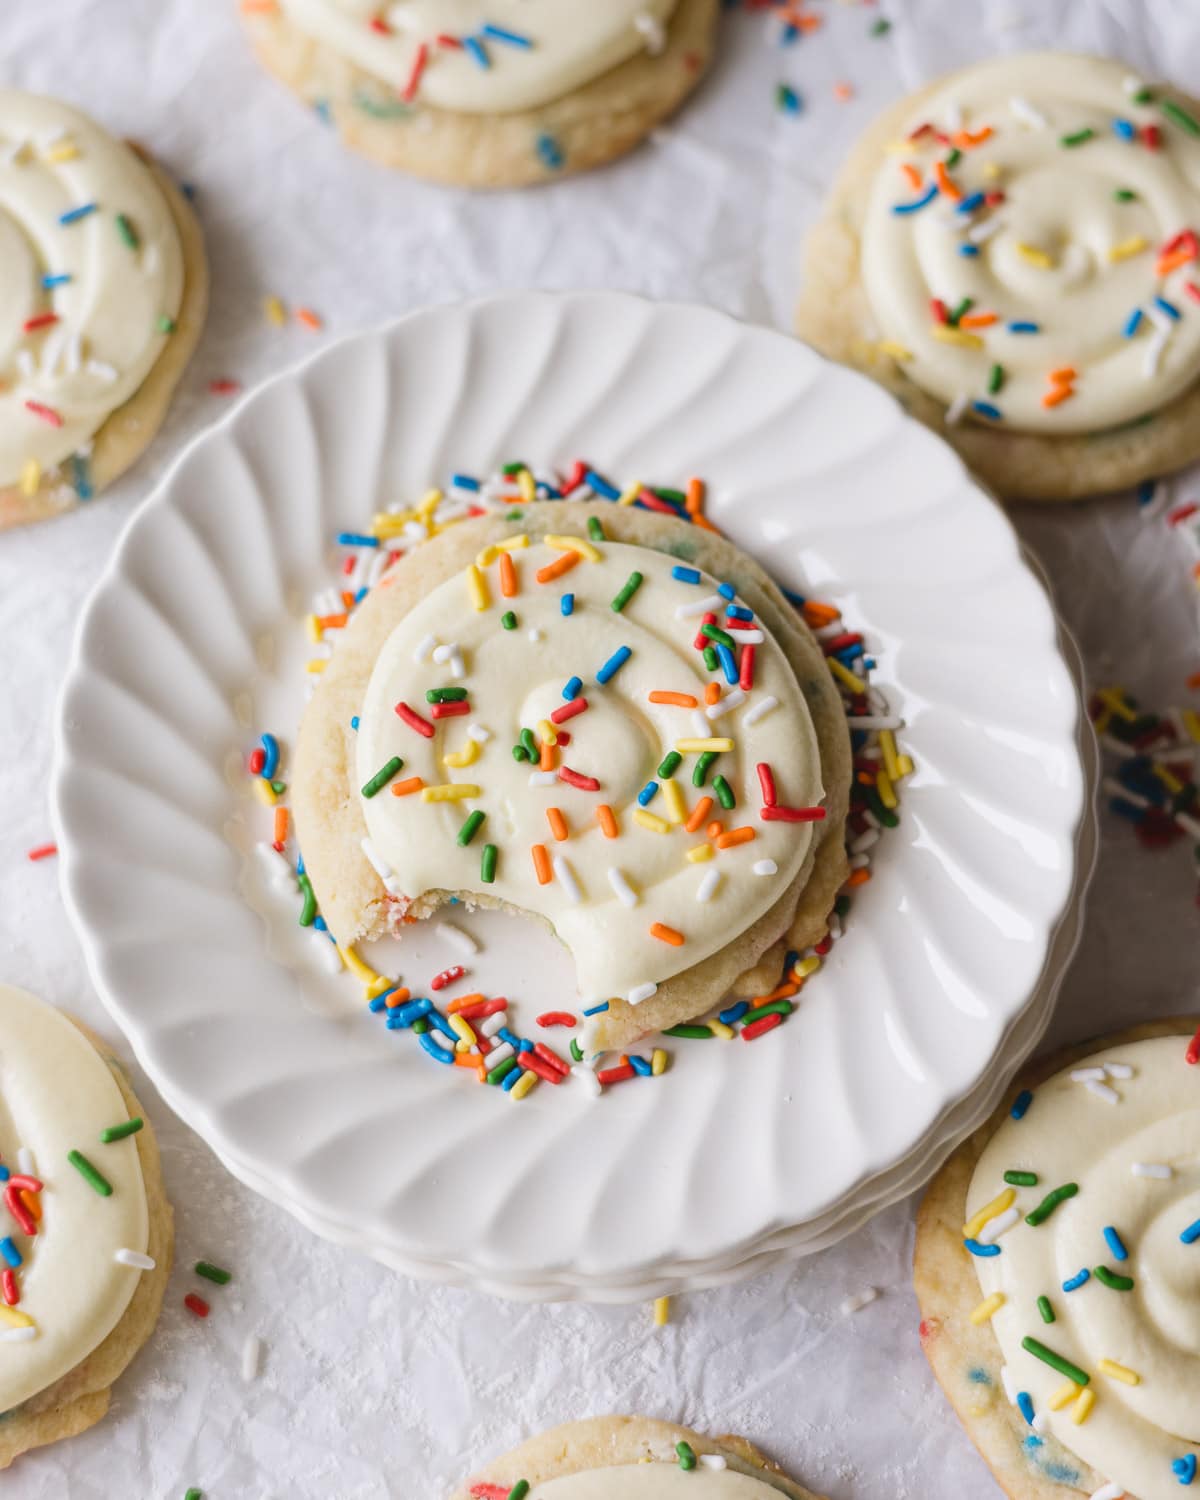 Funfetti cookies with cream cheese frosting and more sprinkles on top.